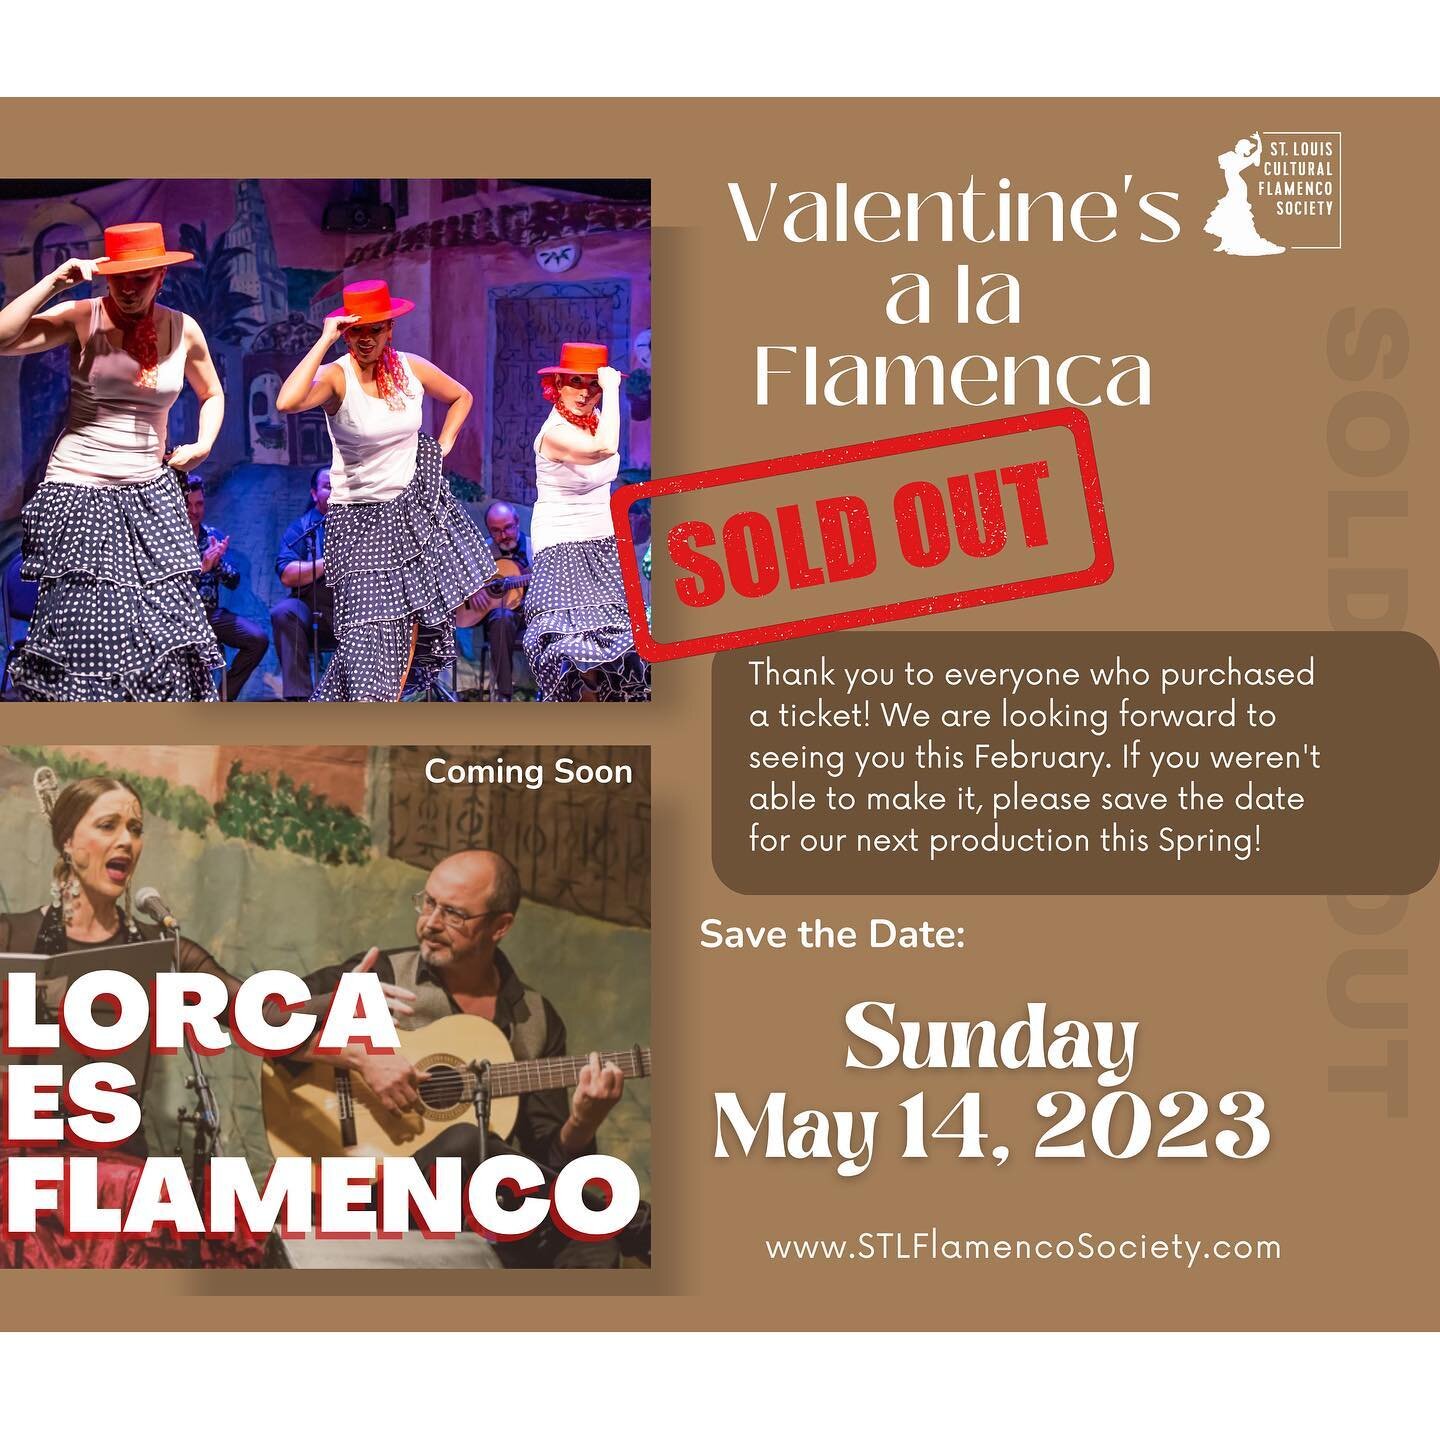 Valentines a la Flamenca is officially SOLD OUT! Thanks to everyone who supported us!